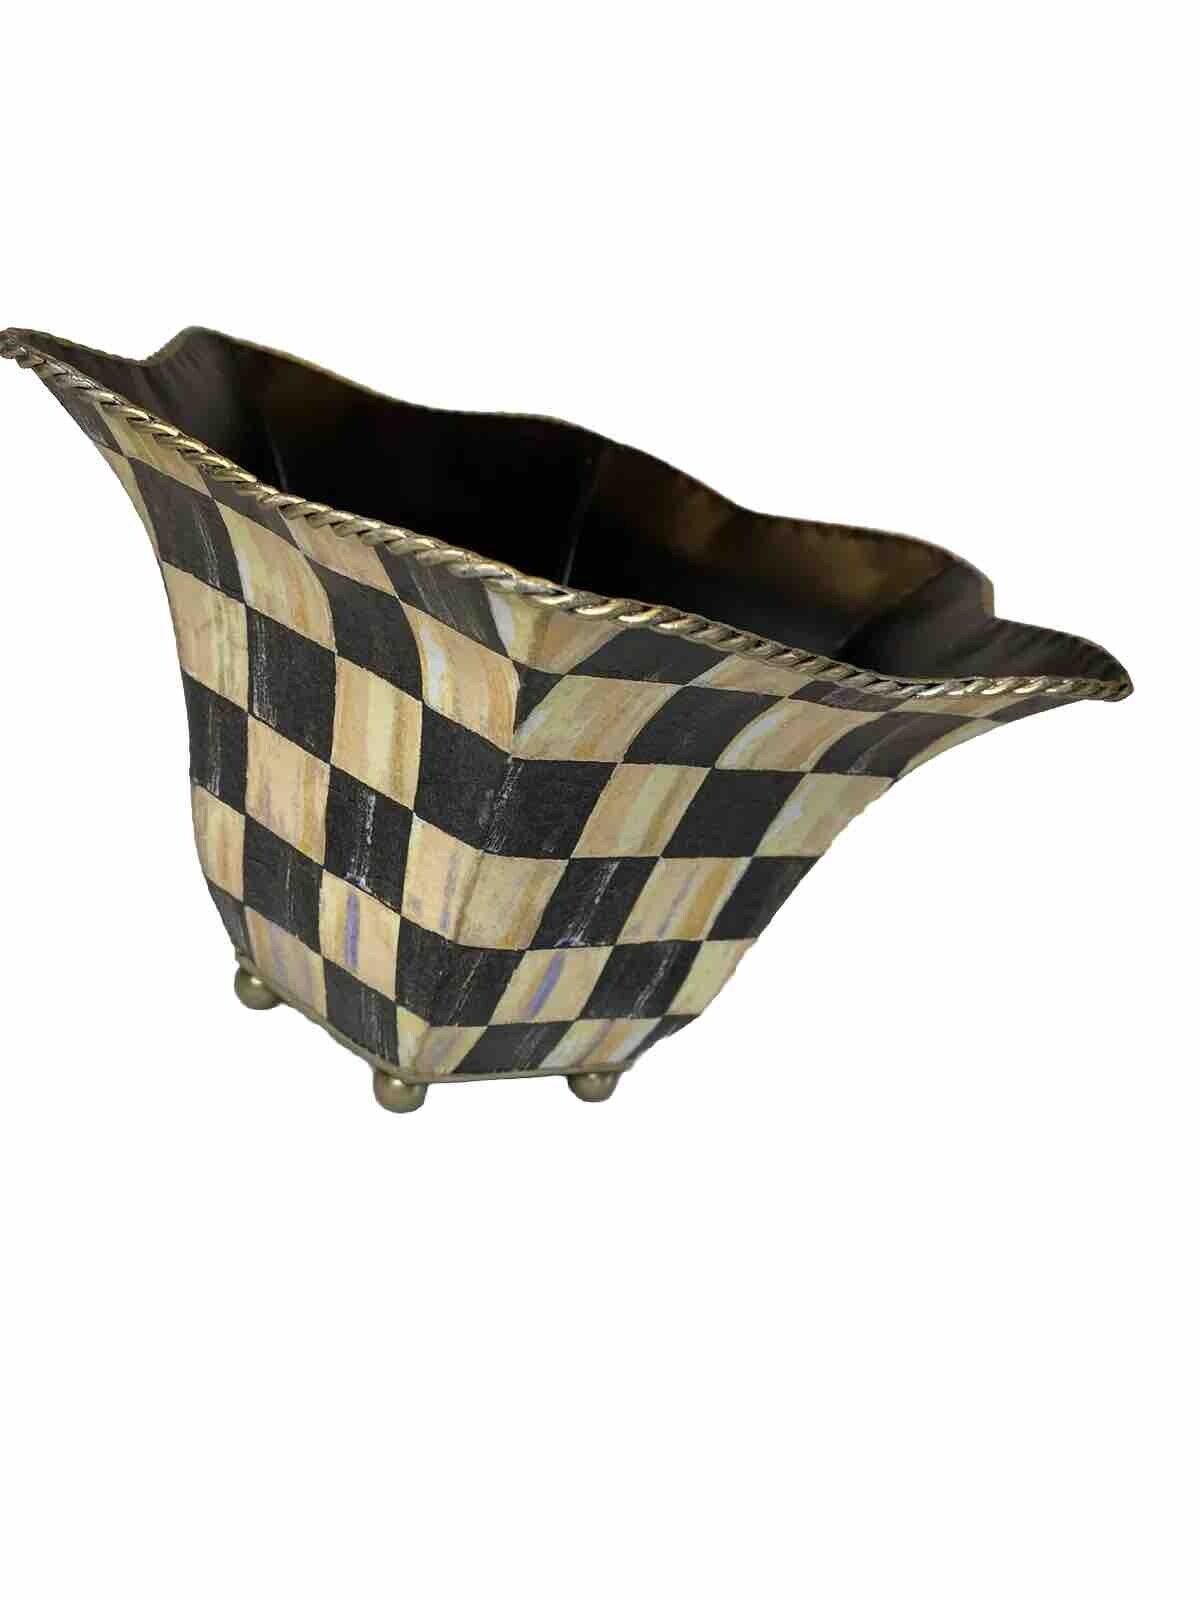 Mackenzie Childs Inspired Courtly Check Cachepot Planter Tole Wow